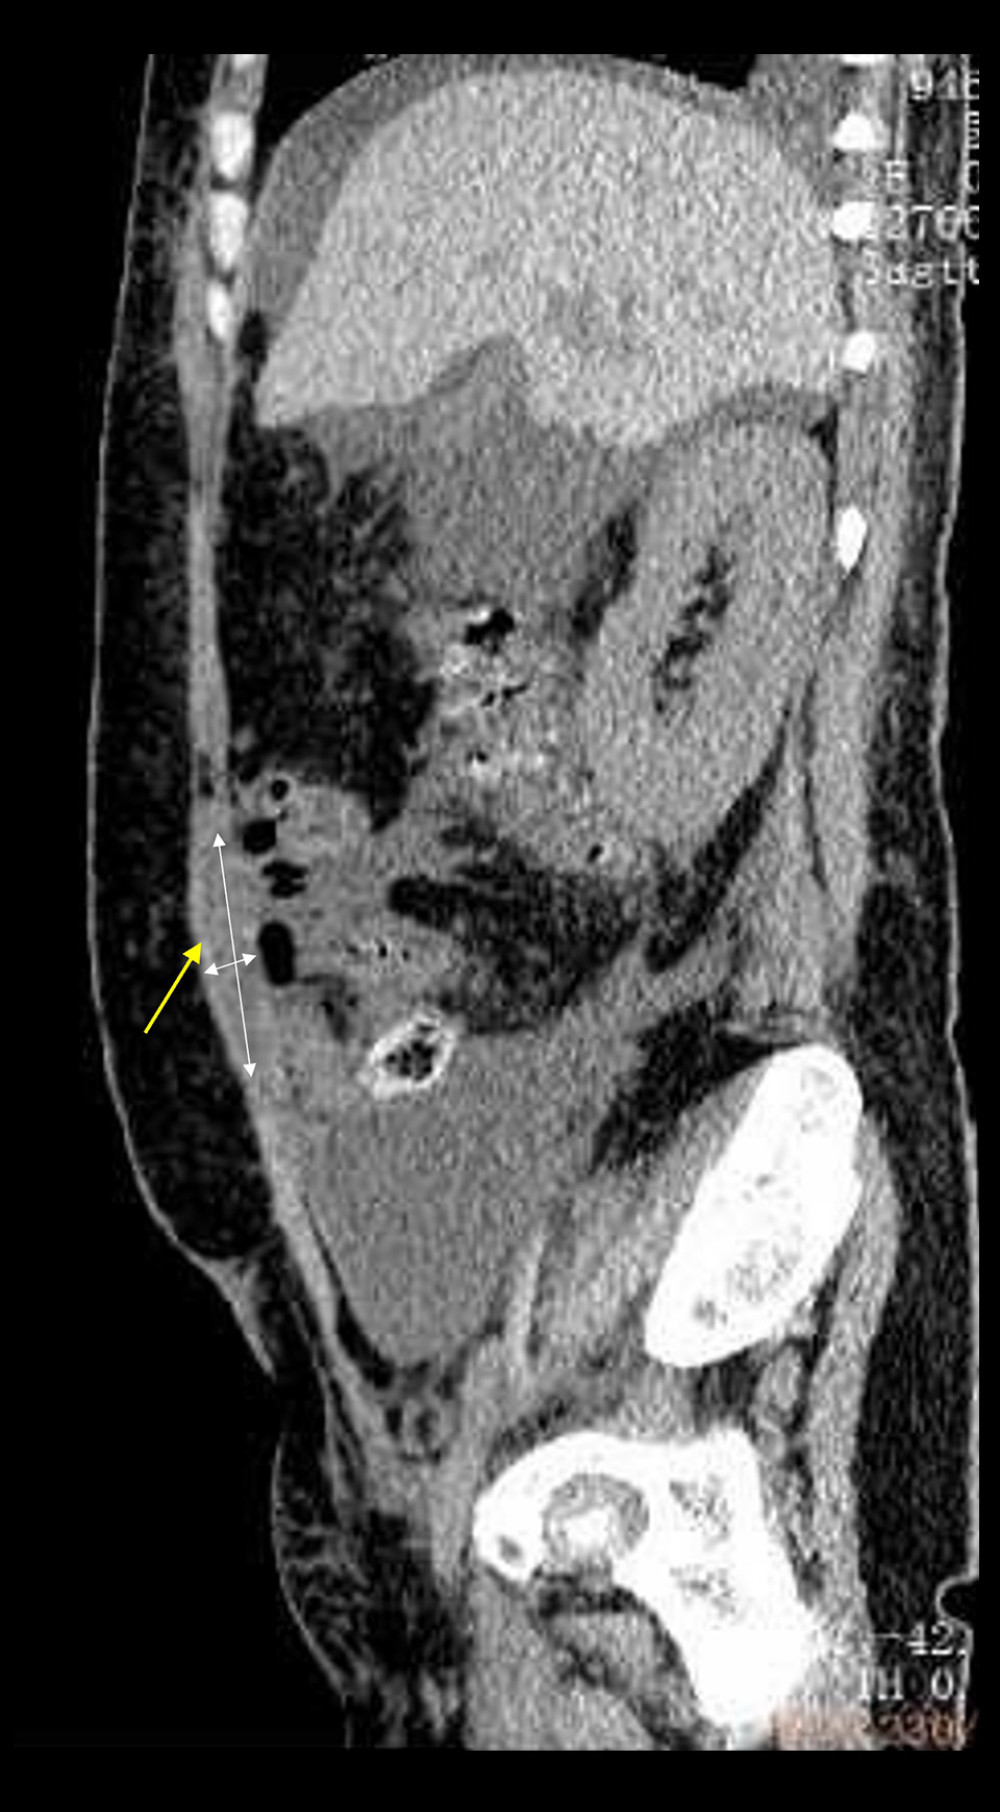 Posttreatment computed tomography (CT) imaging in a 28-year-old woman with a flare of systematic lupus erythematosus and abdominal pain. Posttreatment CT scan showed a reduction in the right RSH (yellow arrow) that measured 8.8×1.6 cm.